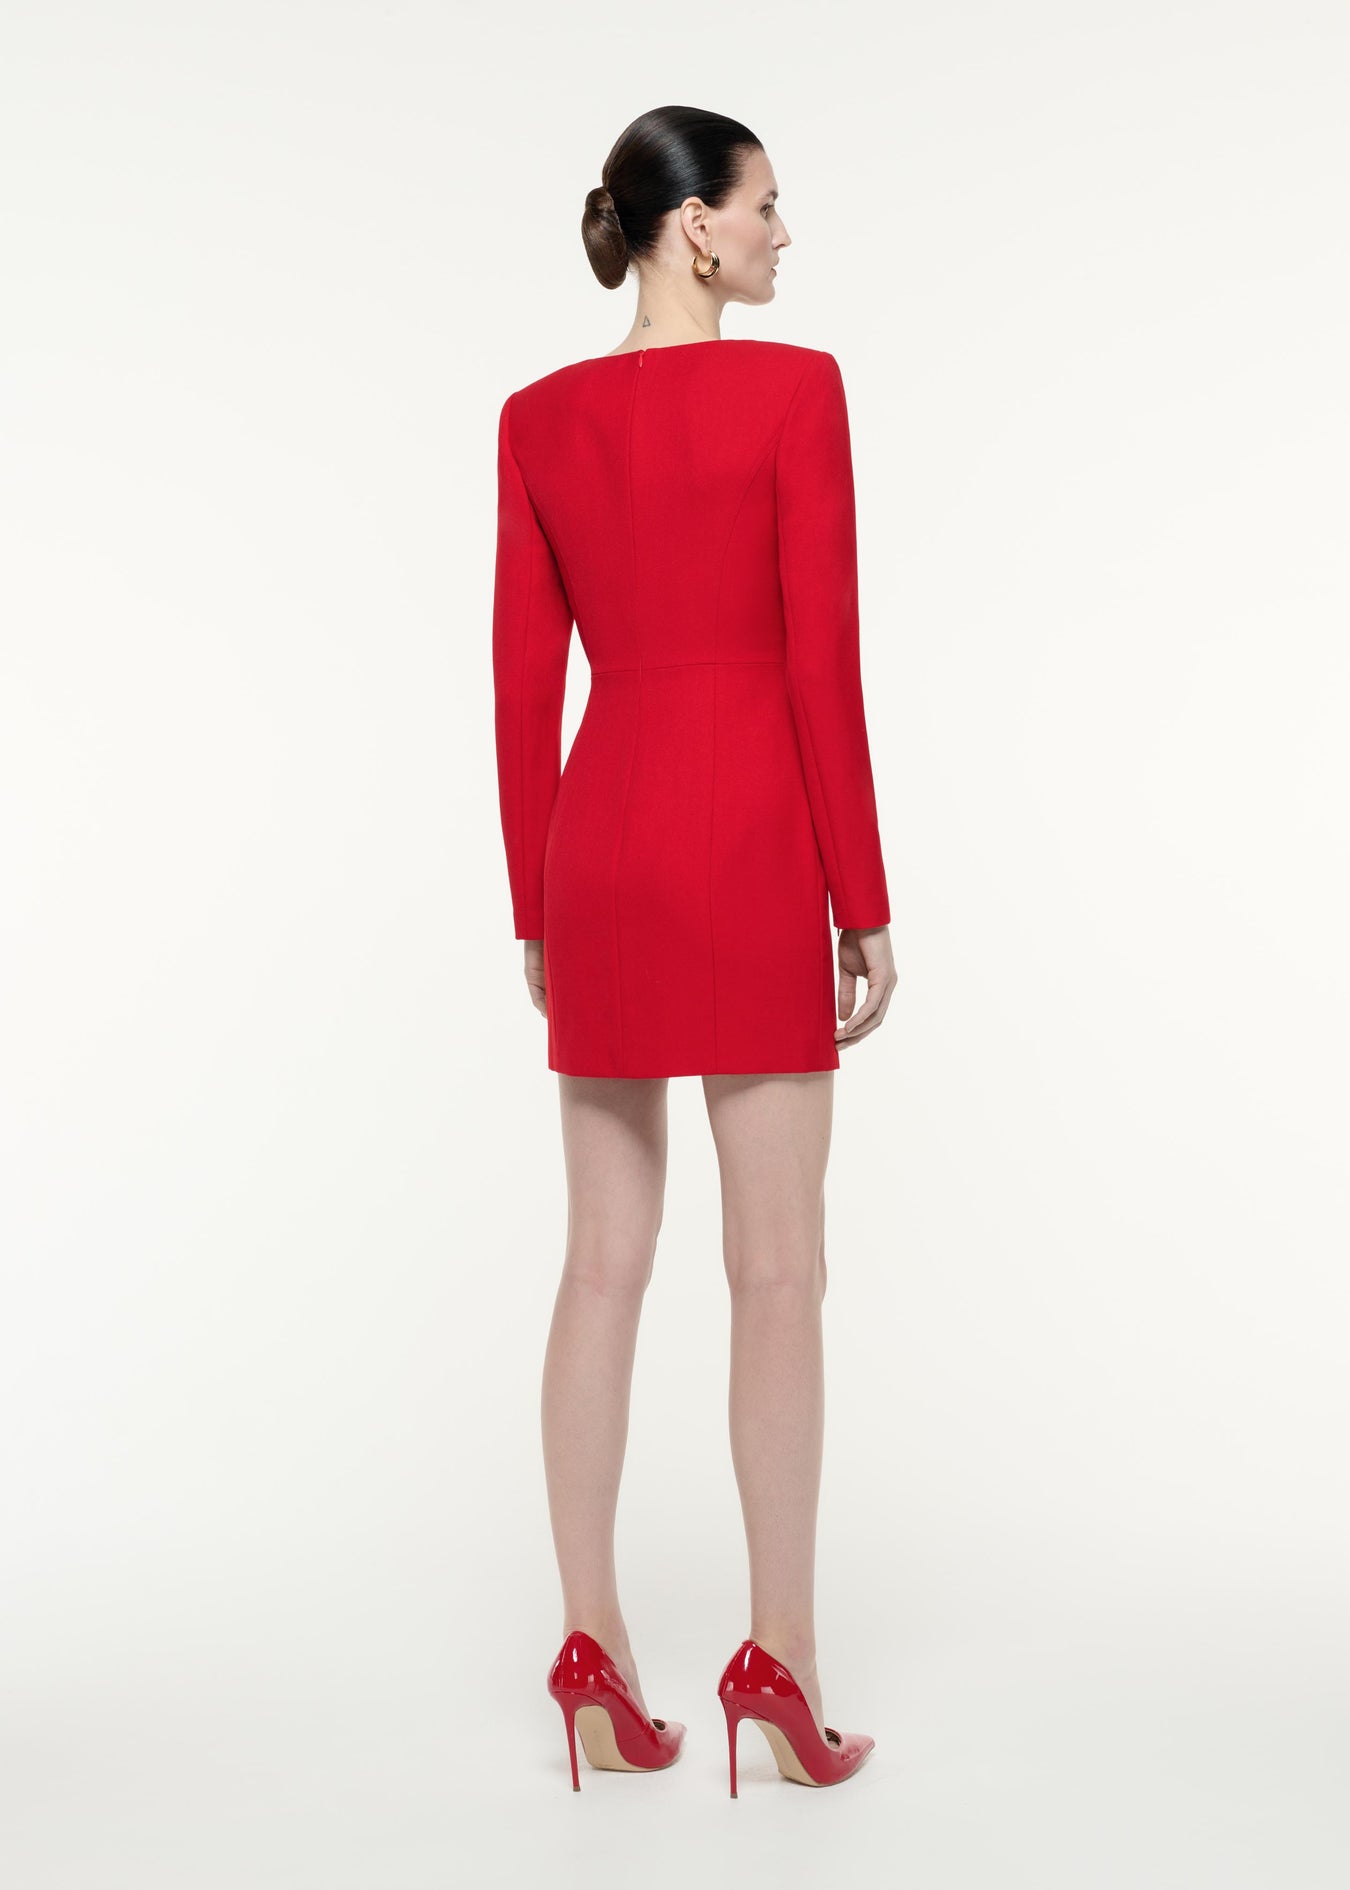 A back view image of a model wearing the Long Sleeve Tailoring Wool Mini Dress in Red